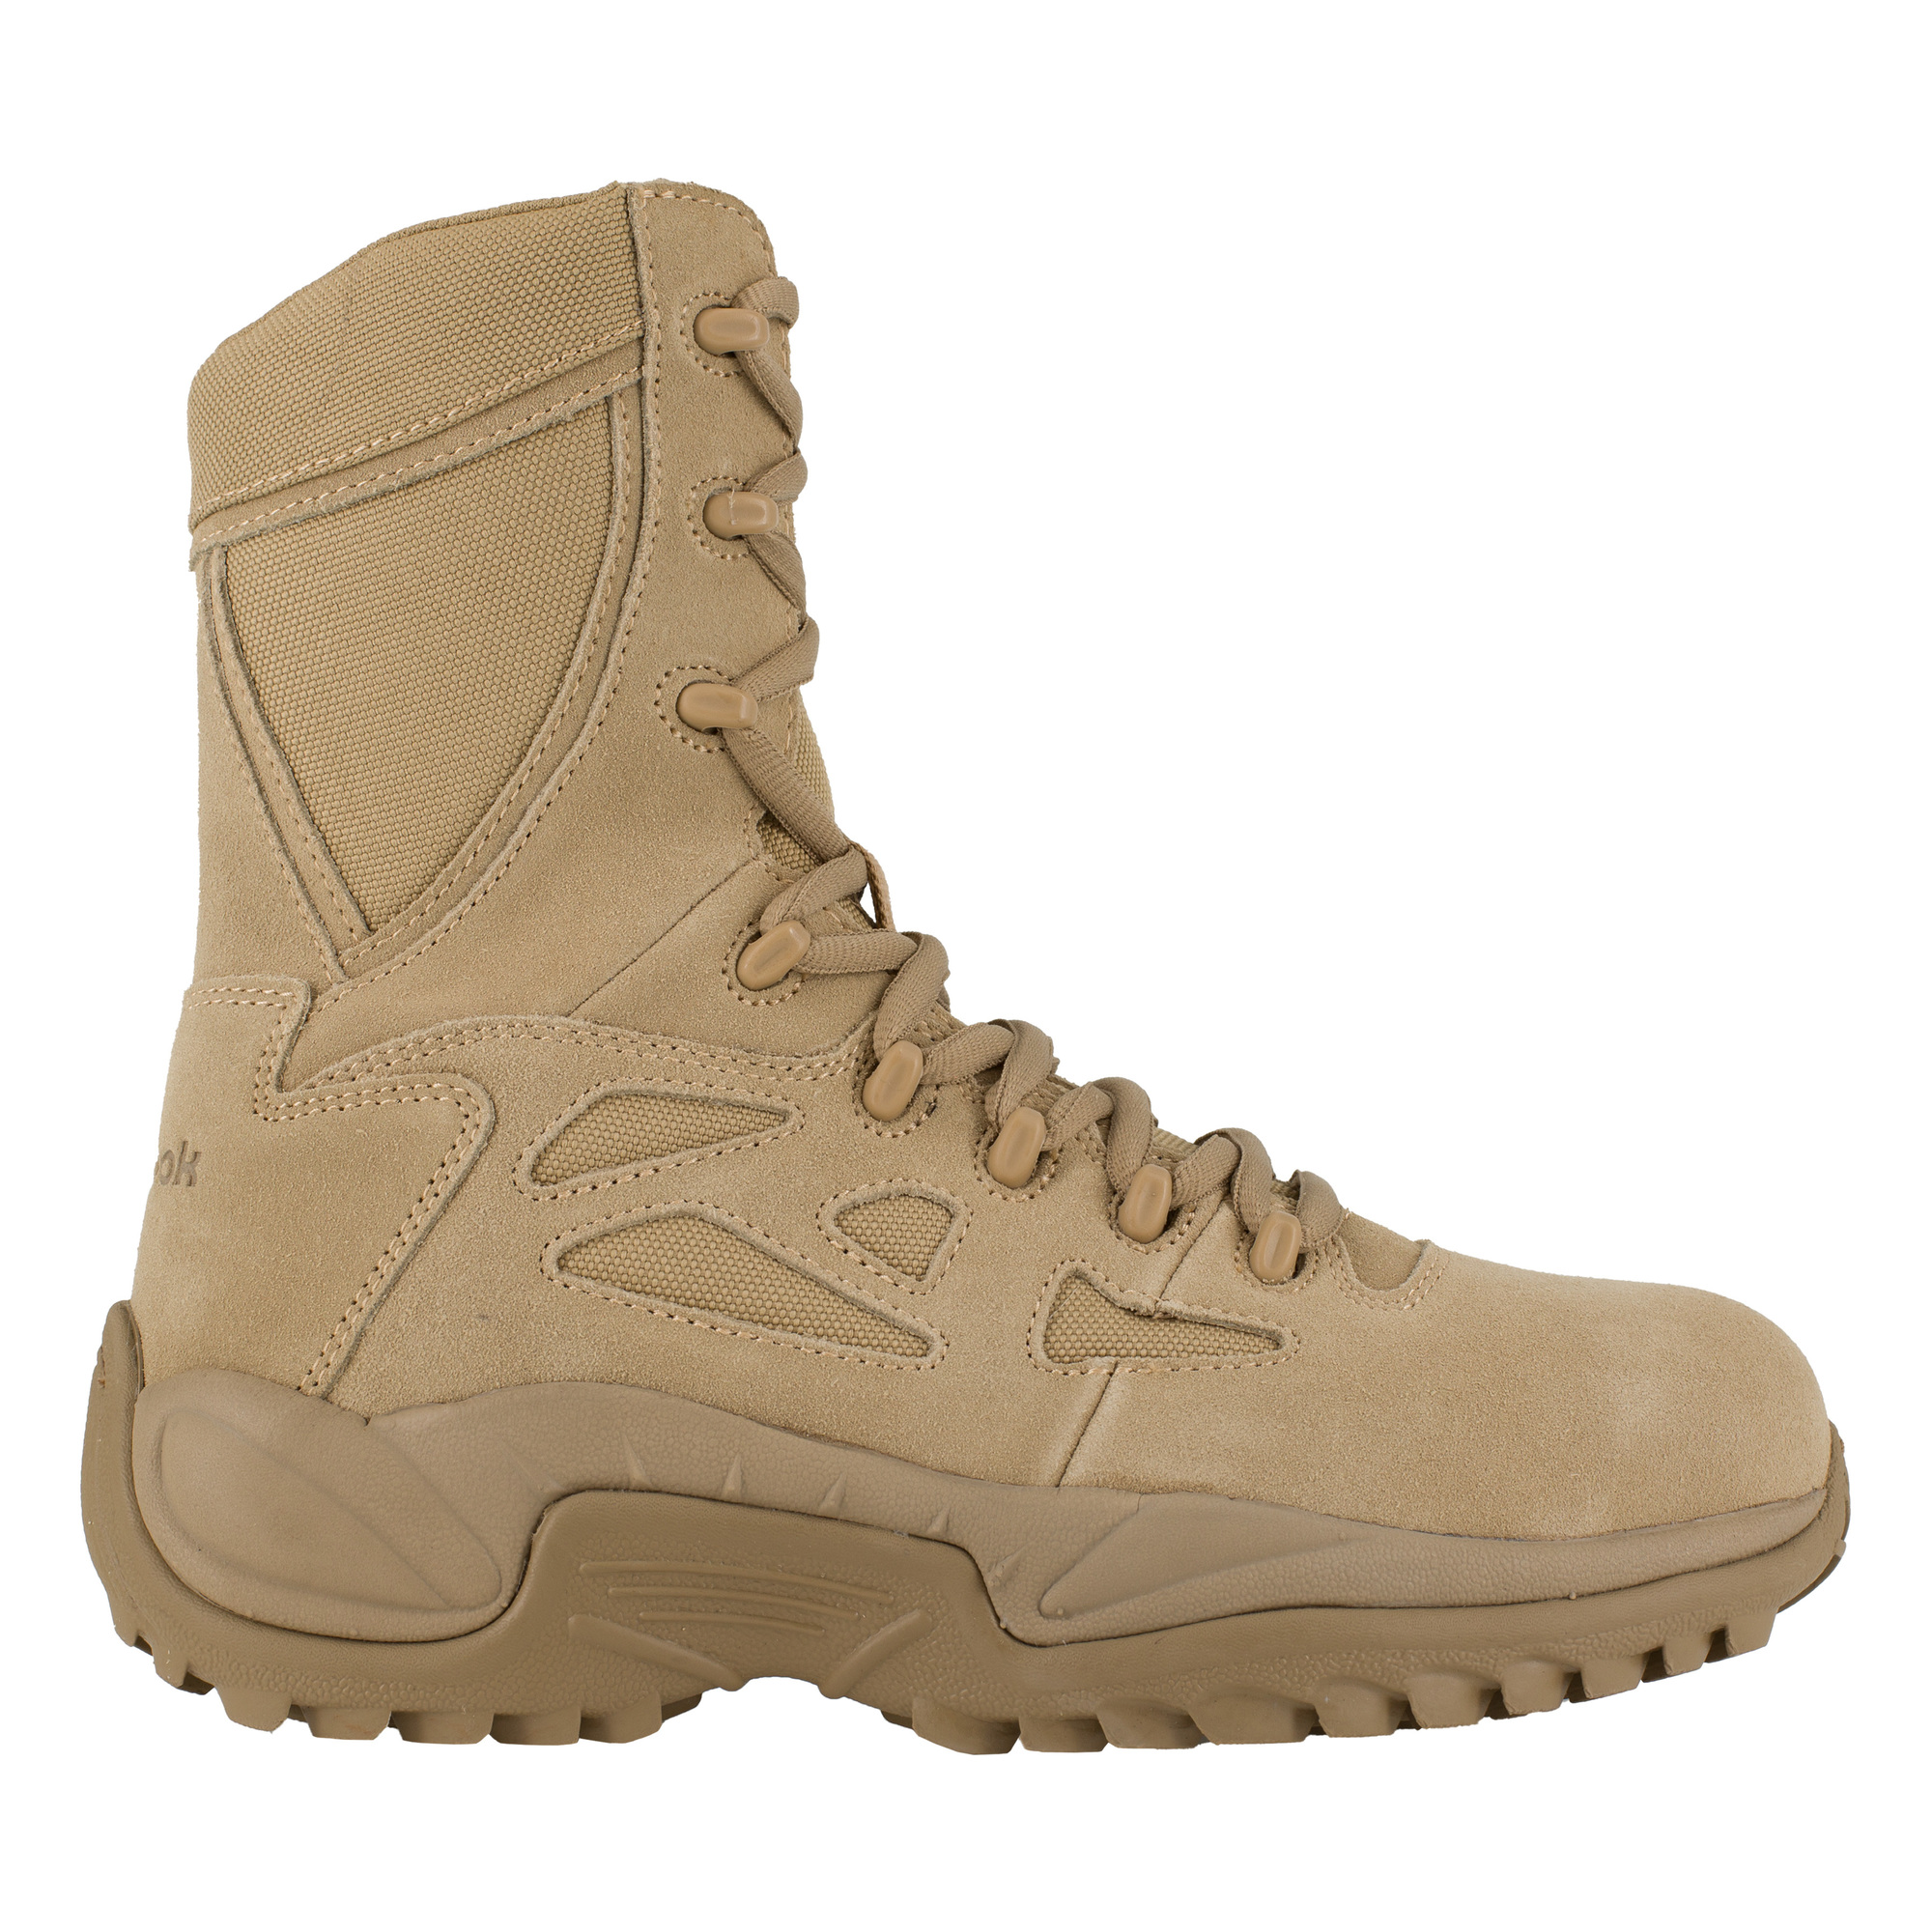 Reebok, 8Inch Stealth Tactical Boot with Side Zipper, Size 8, Width Wide, Color Desert Tan, Model RB894 -  RB894-W-08.0